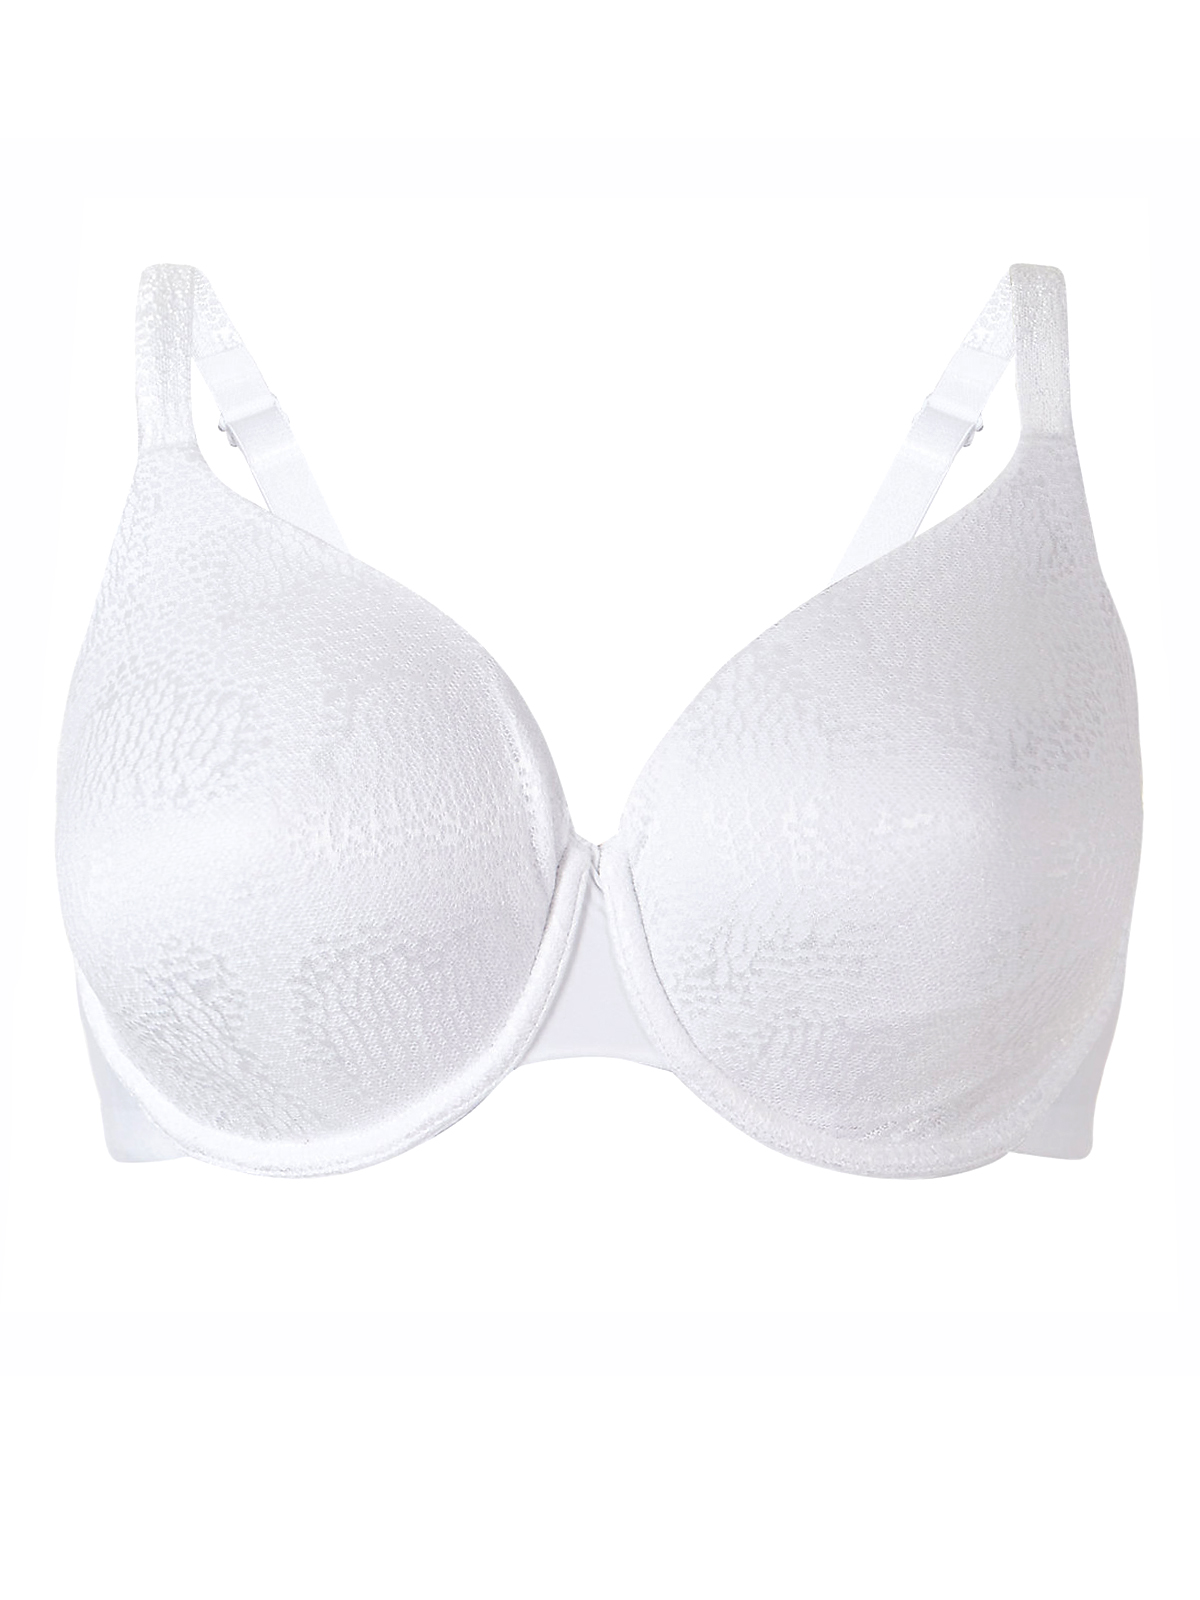 Marks and Spencer - - M&5 WHITE Smoothing Jacquard Full Cup Bra - Cup ...